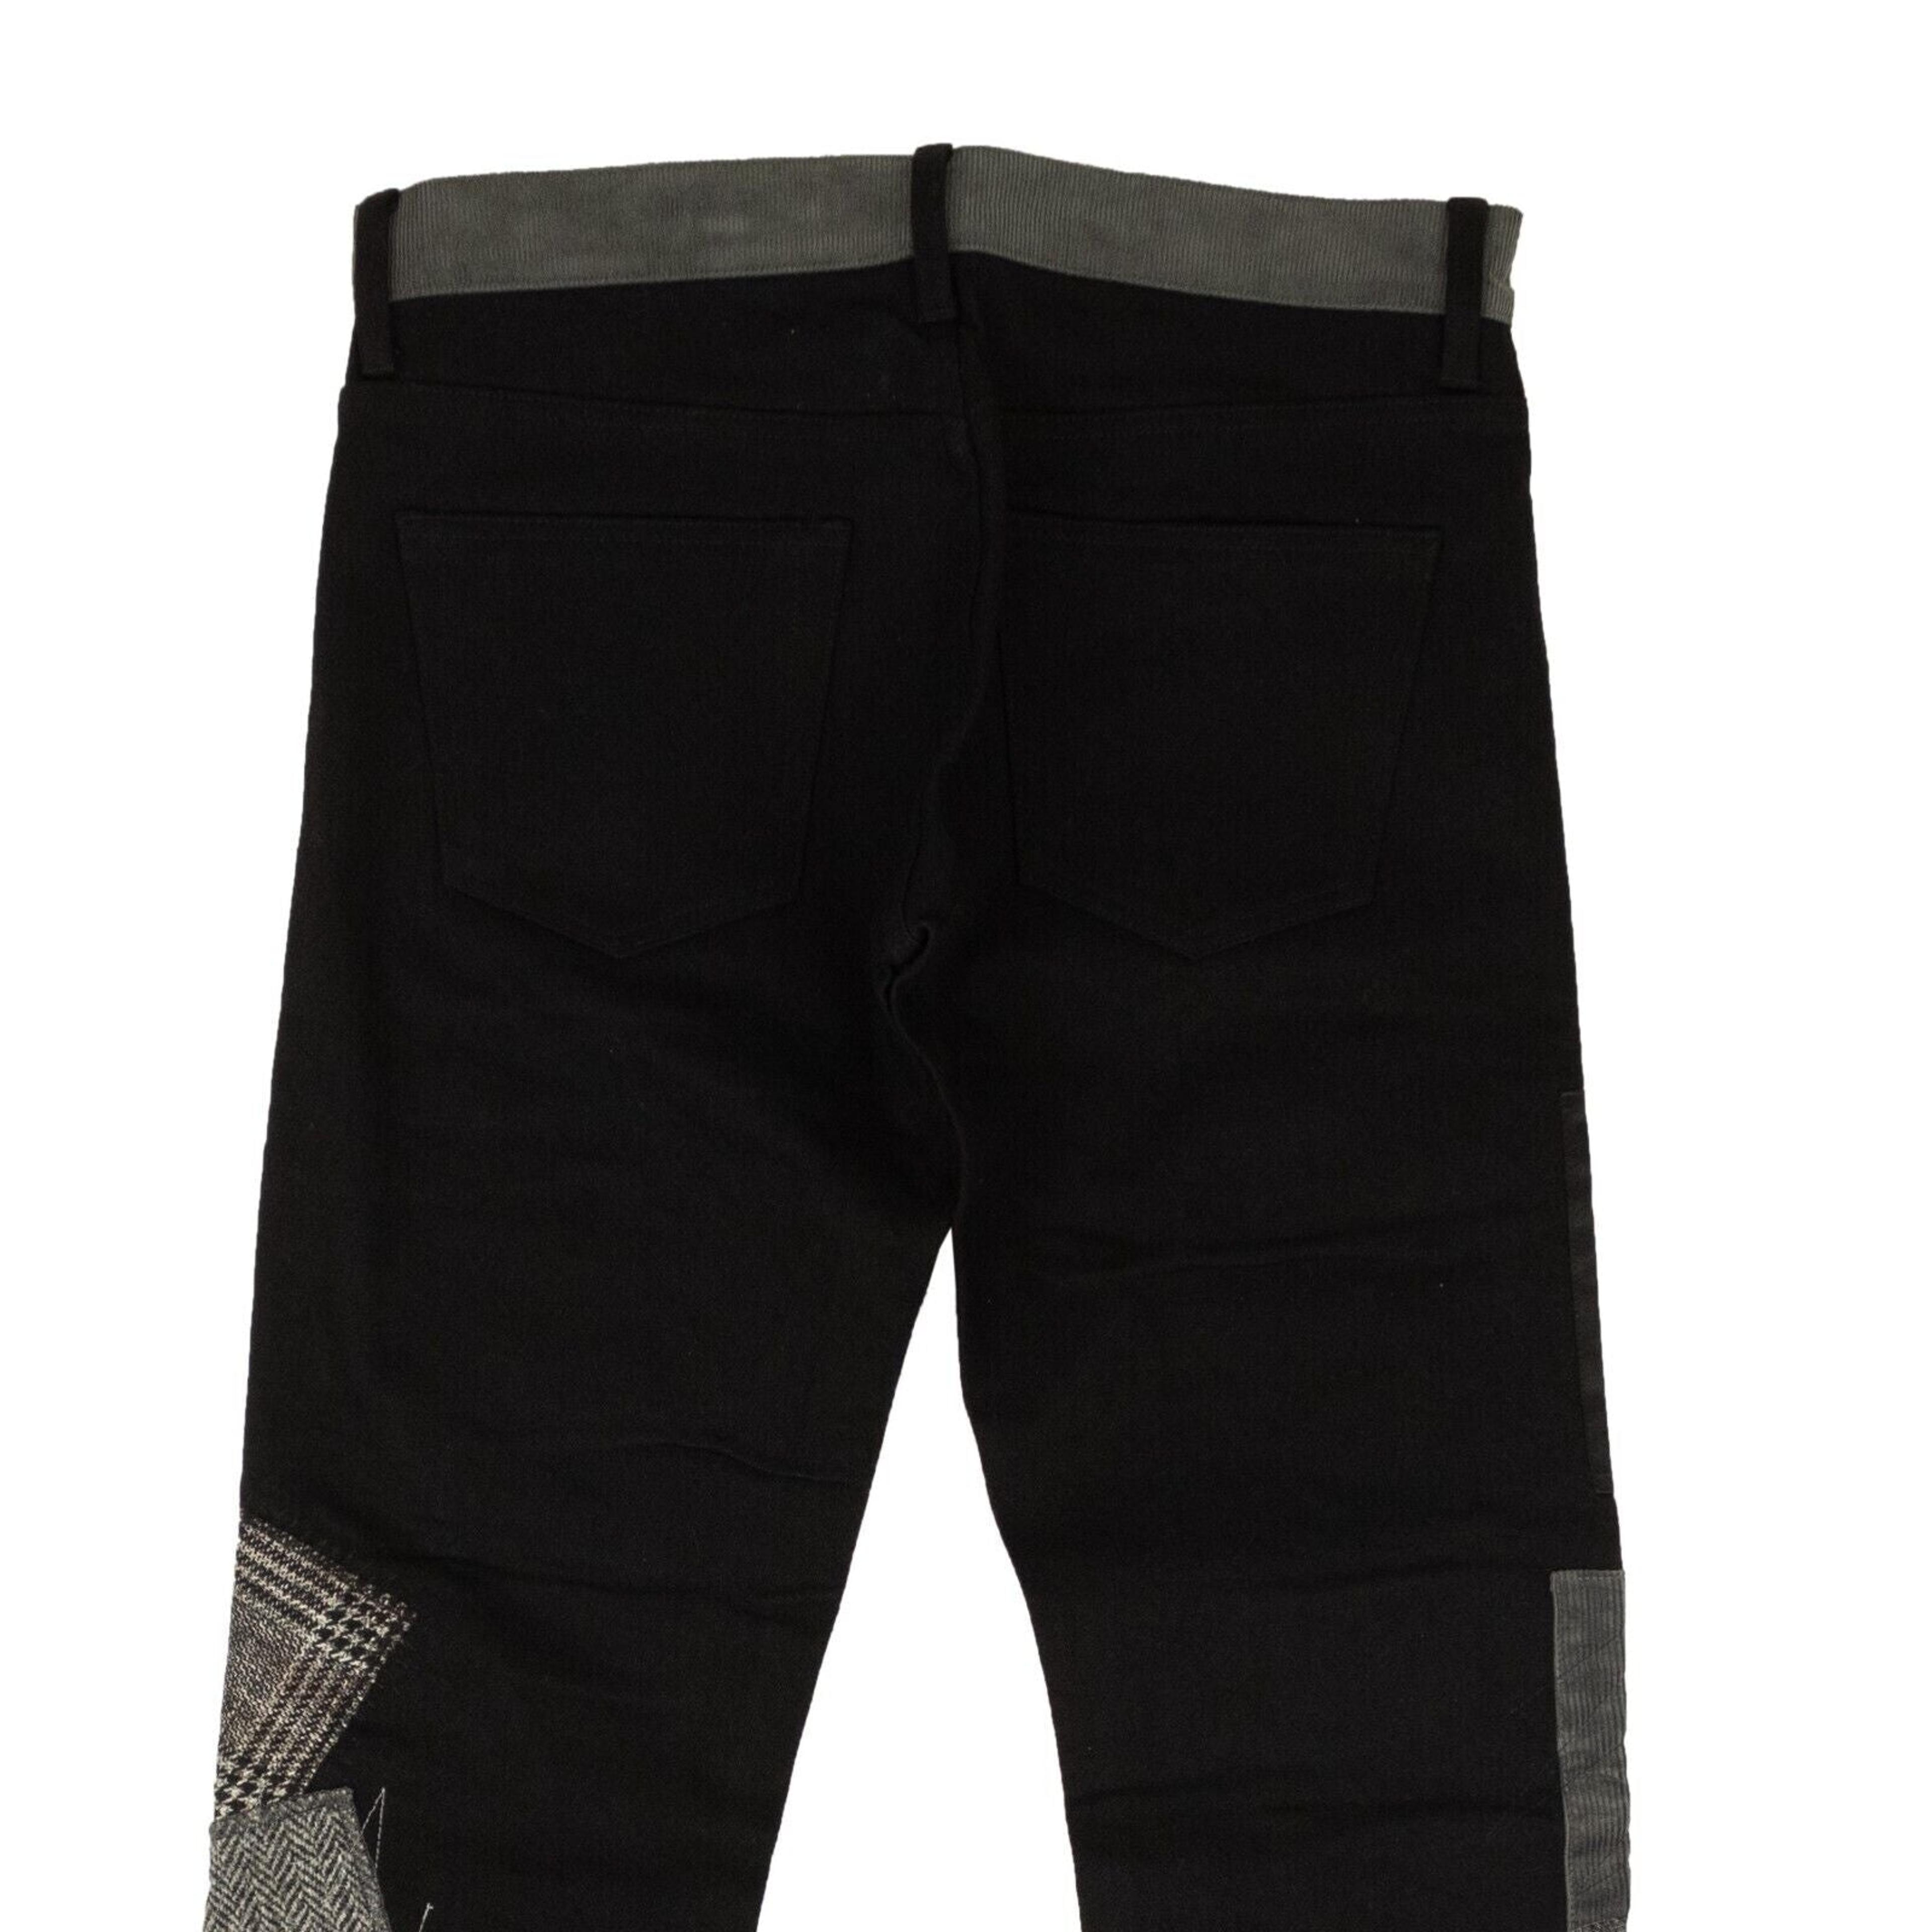 Alternate View 3 of Black And Grey Cotton Patchwork Detail Pants